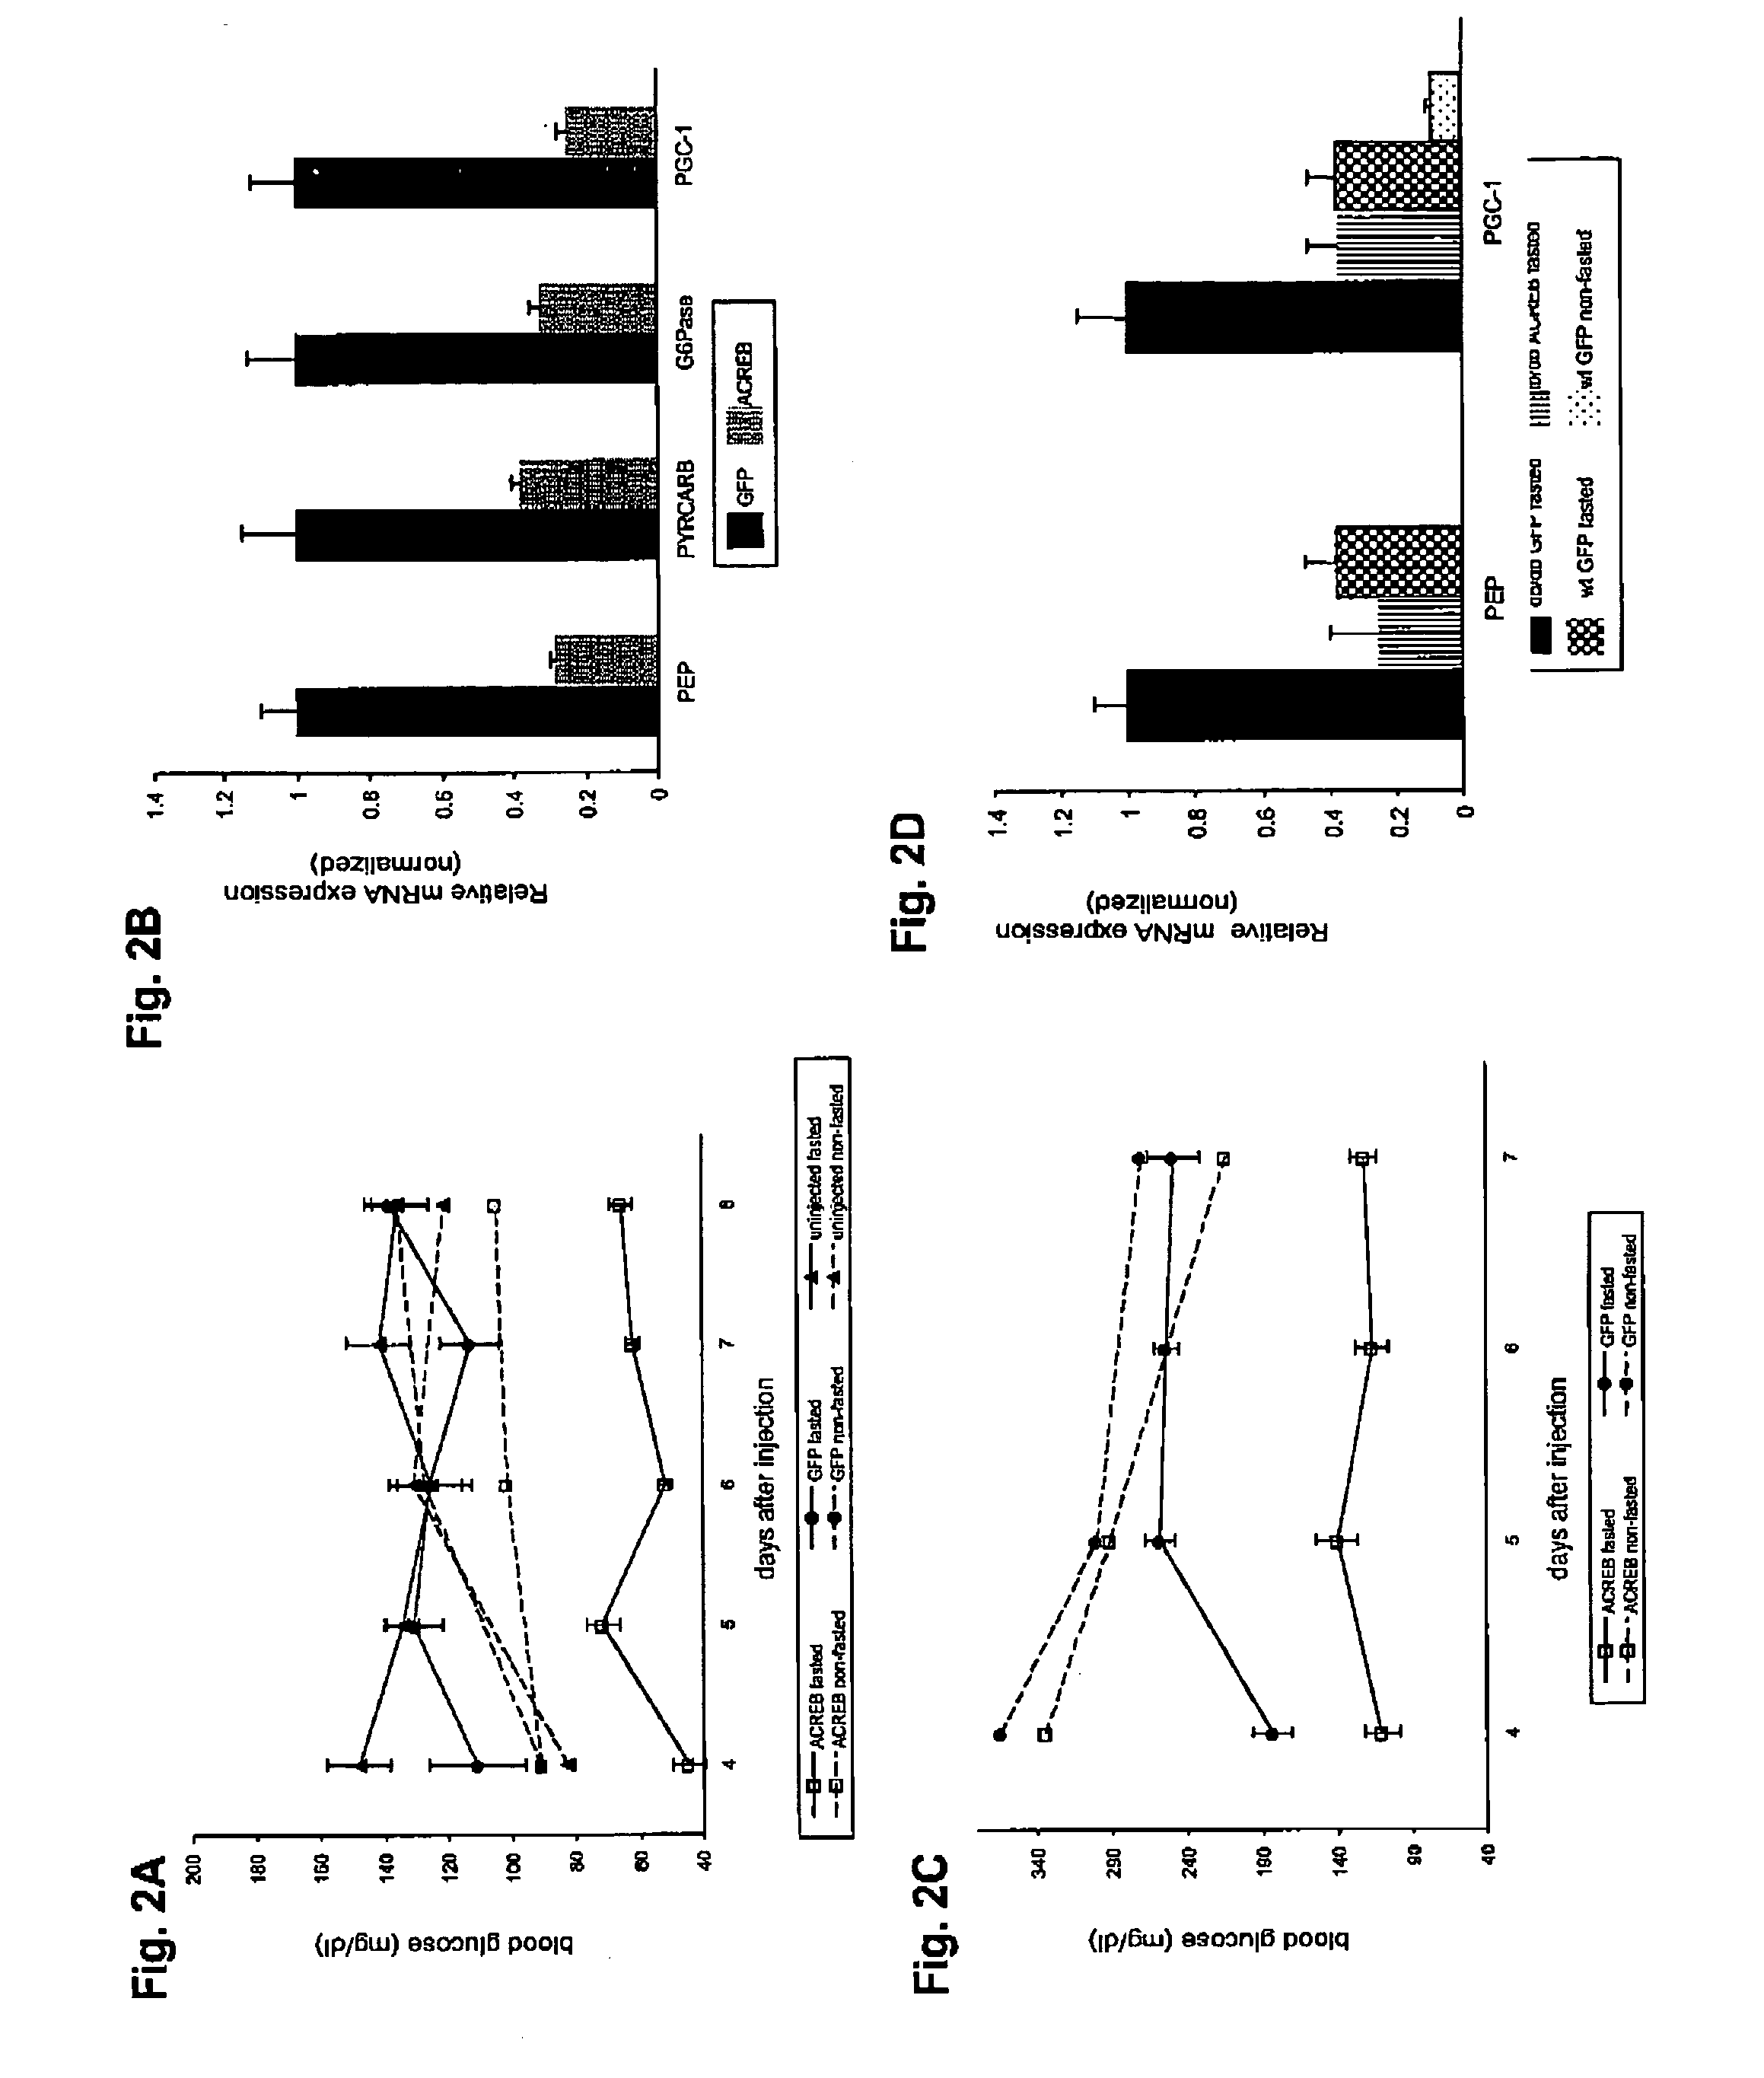 Methods for indentifying compounds that modulate gluconeogenesis through the binding of CREB to the PGC-1 promoter